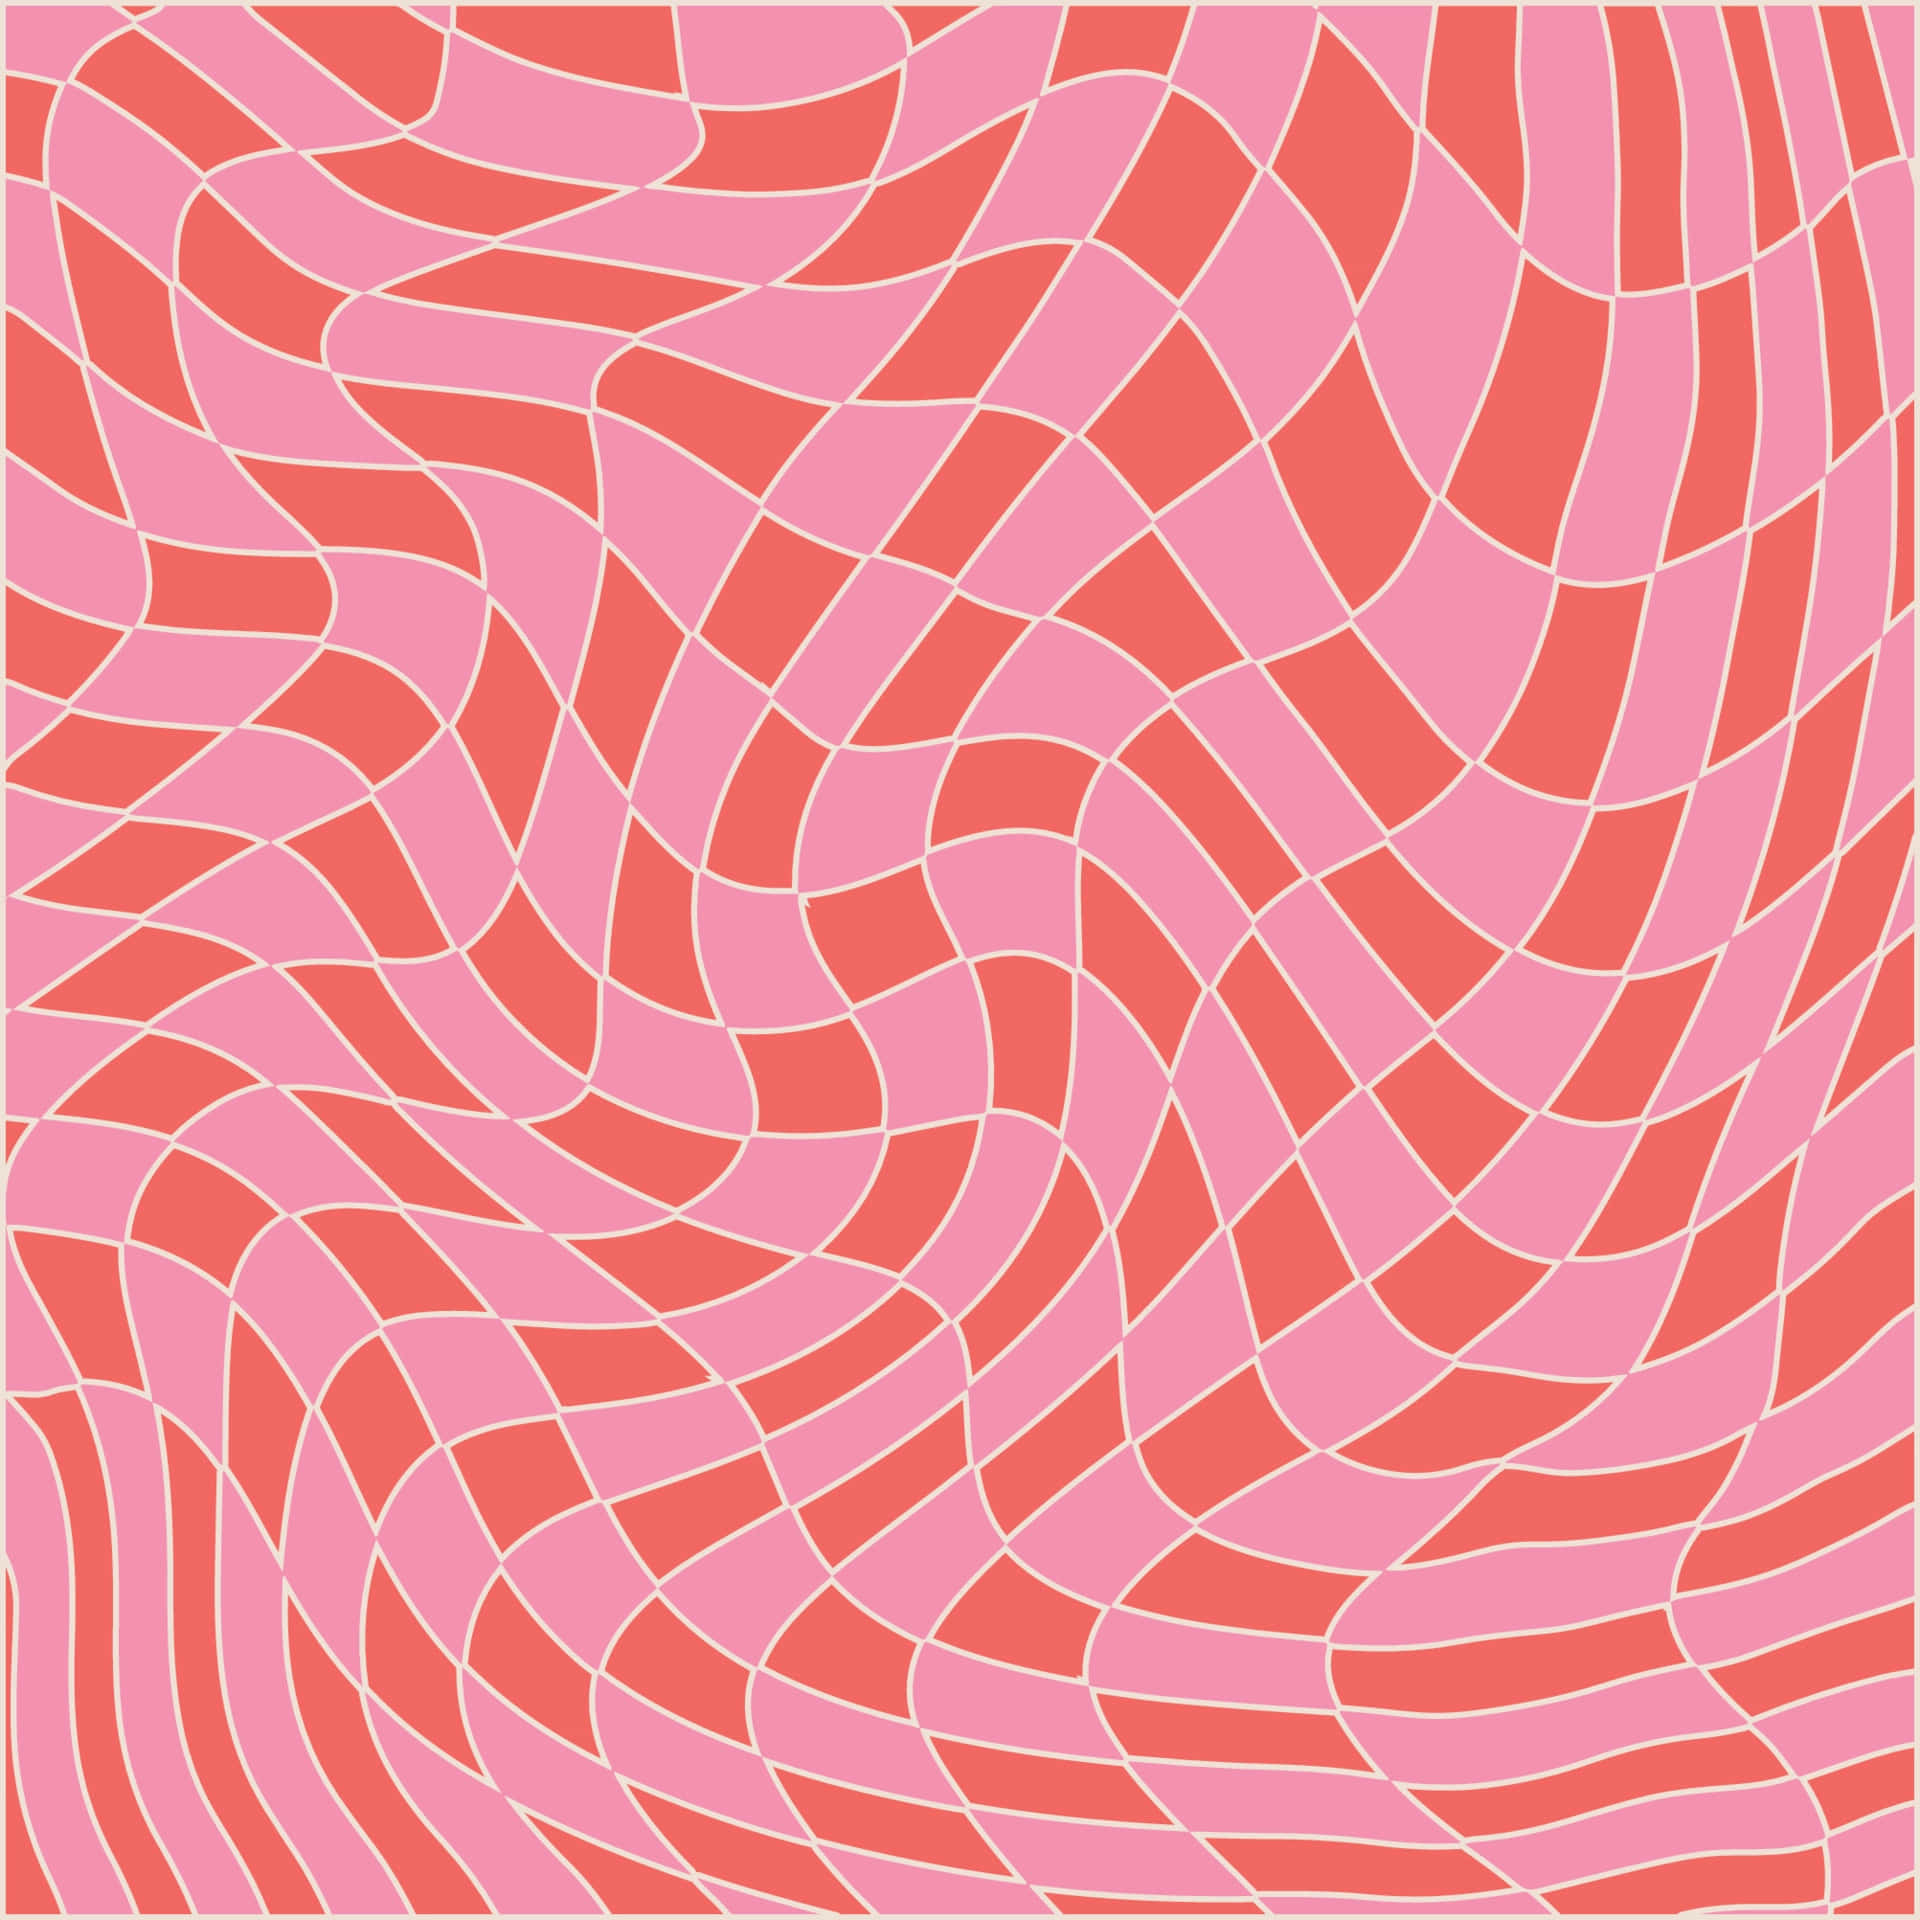 70's Groovy Background Pink Curvy Square Texture